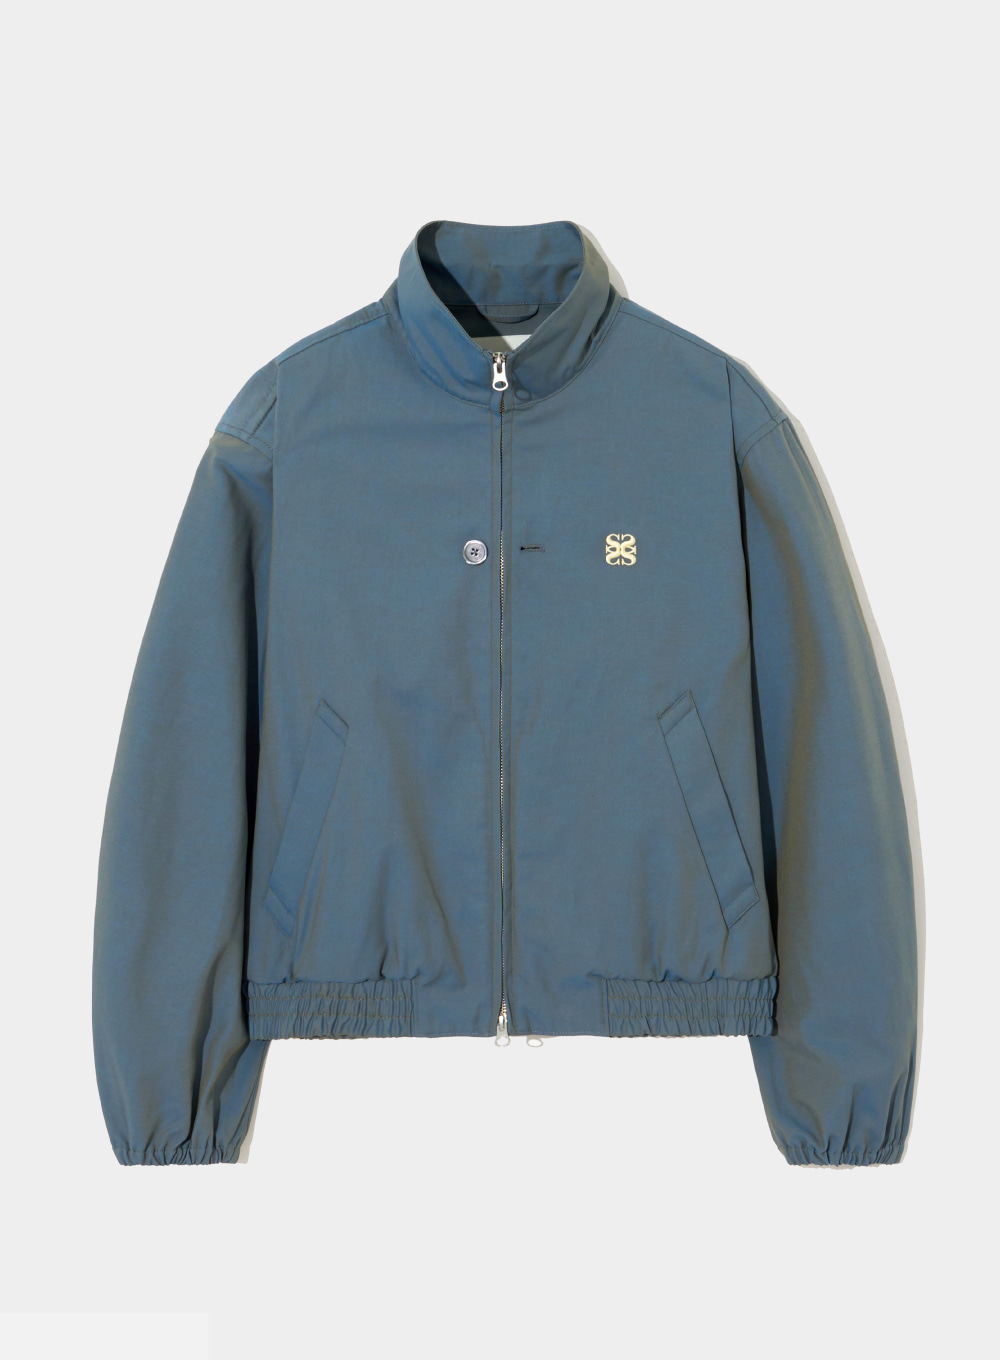 Lecce Two Tone Zip Up Jacket - Emerald Blue